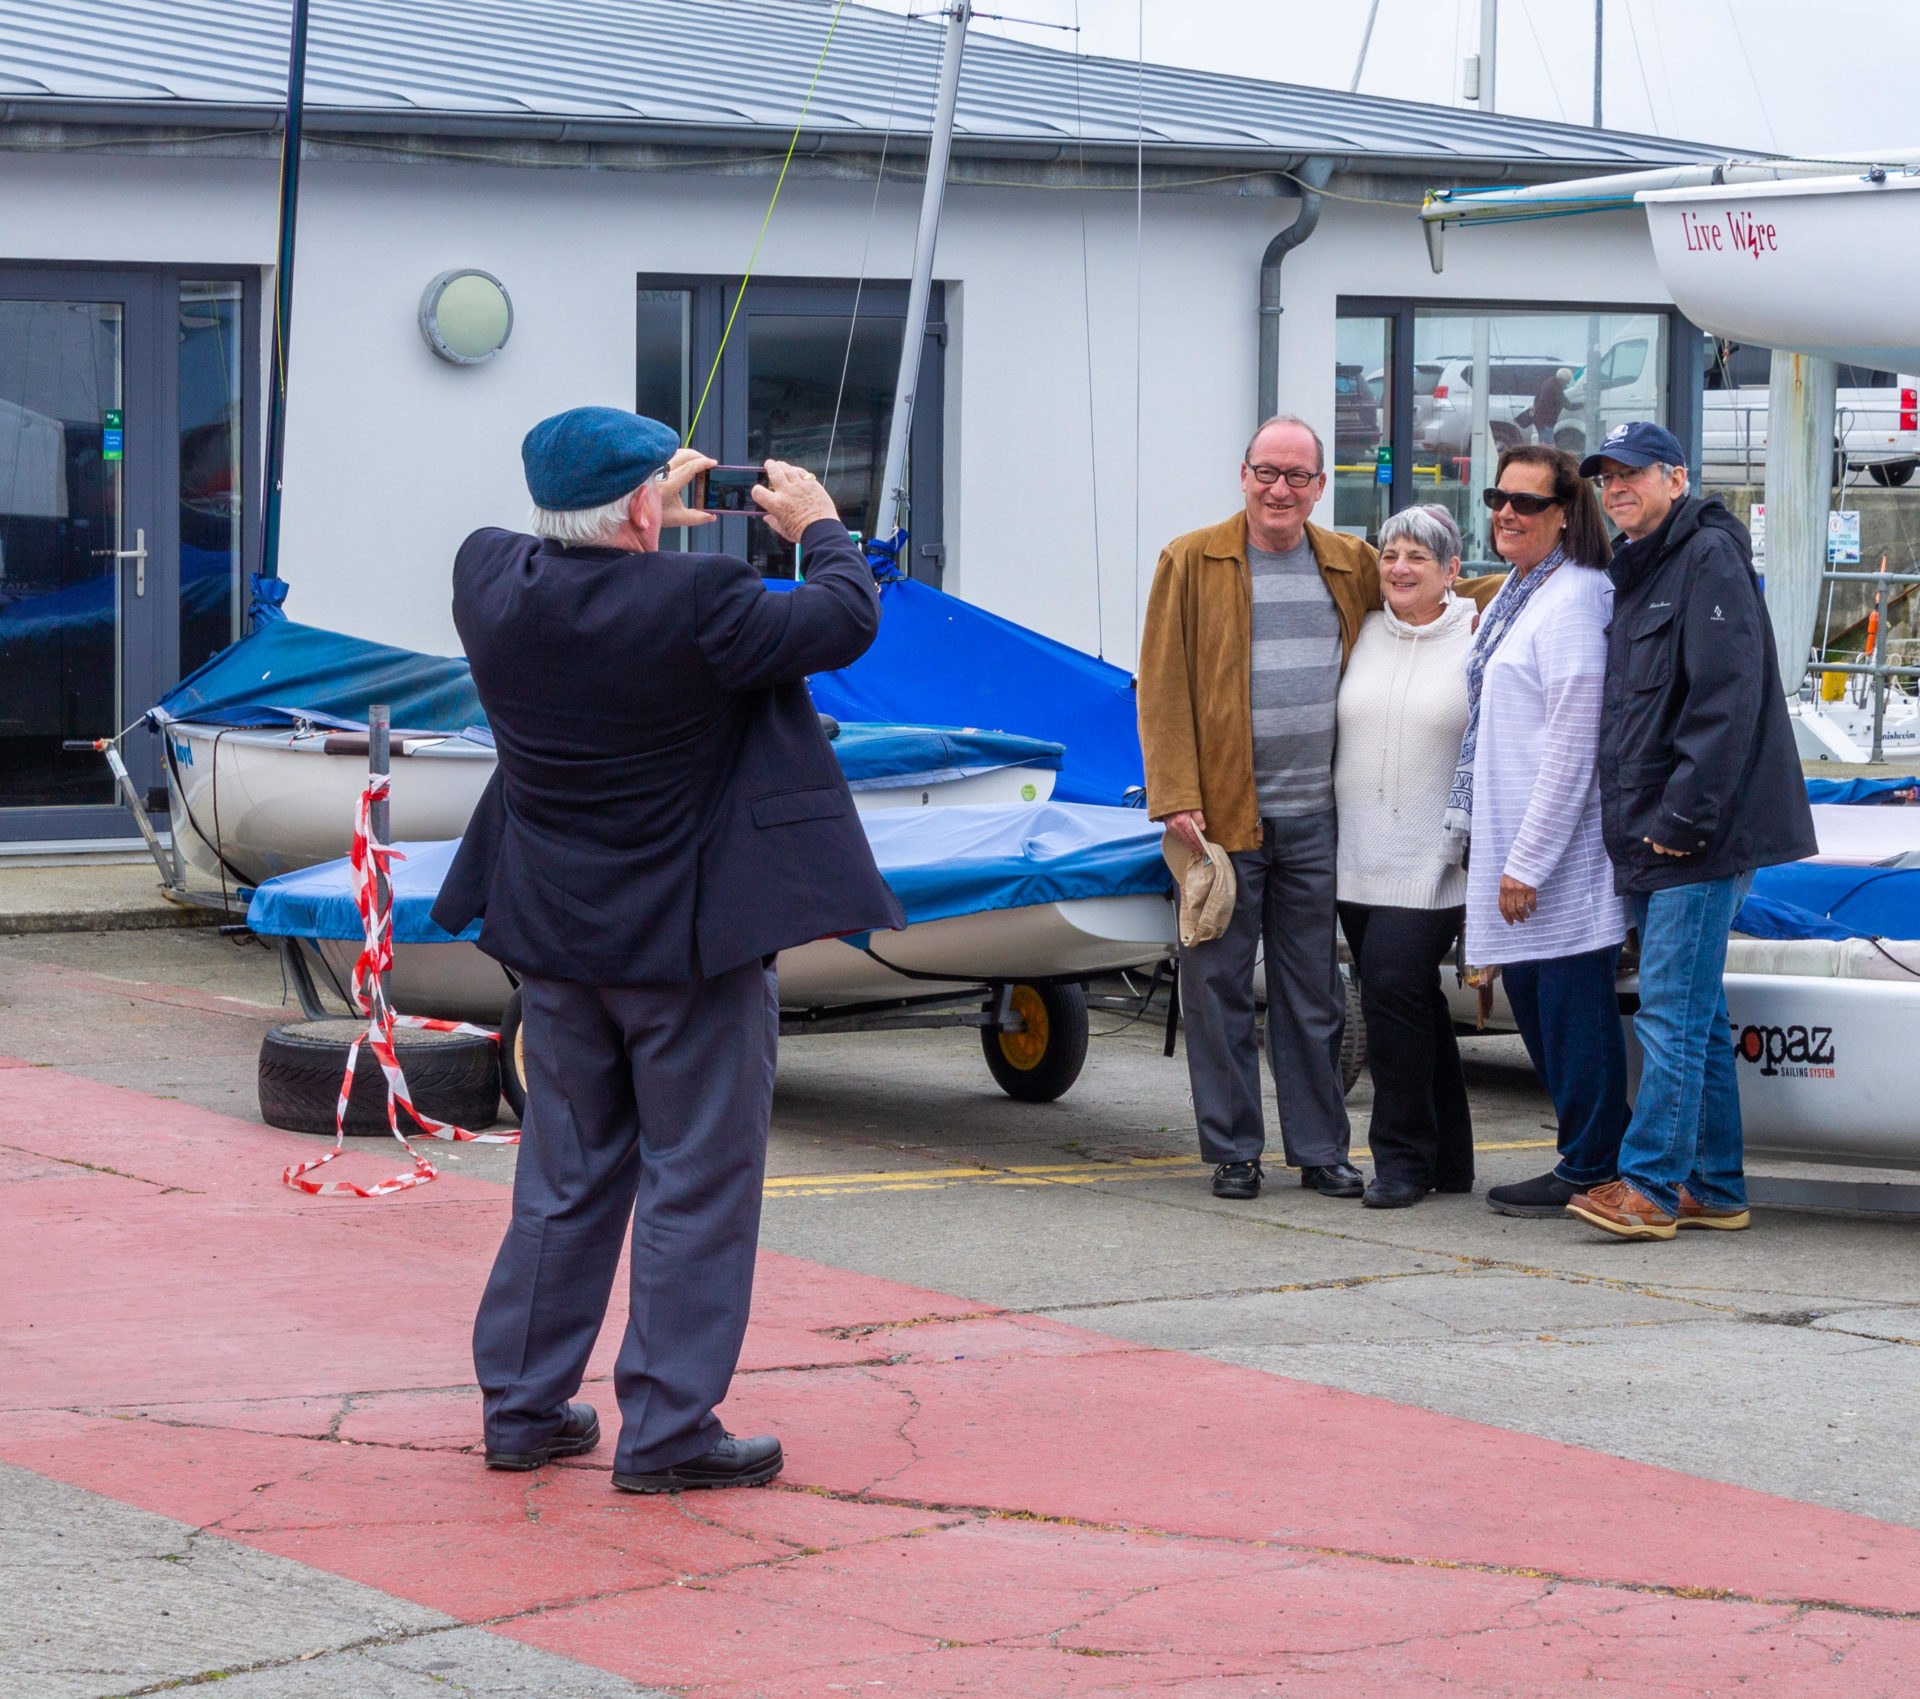 Tourists having their photographs taken by another american tourist outside baltimore yacht club in ireland.